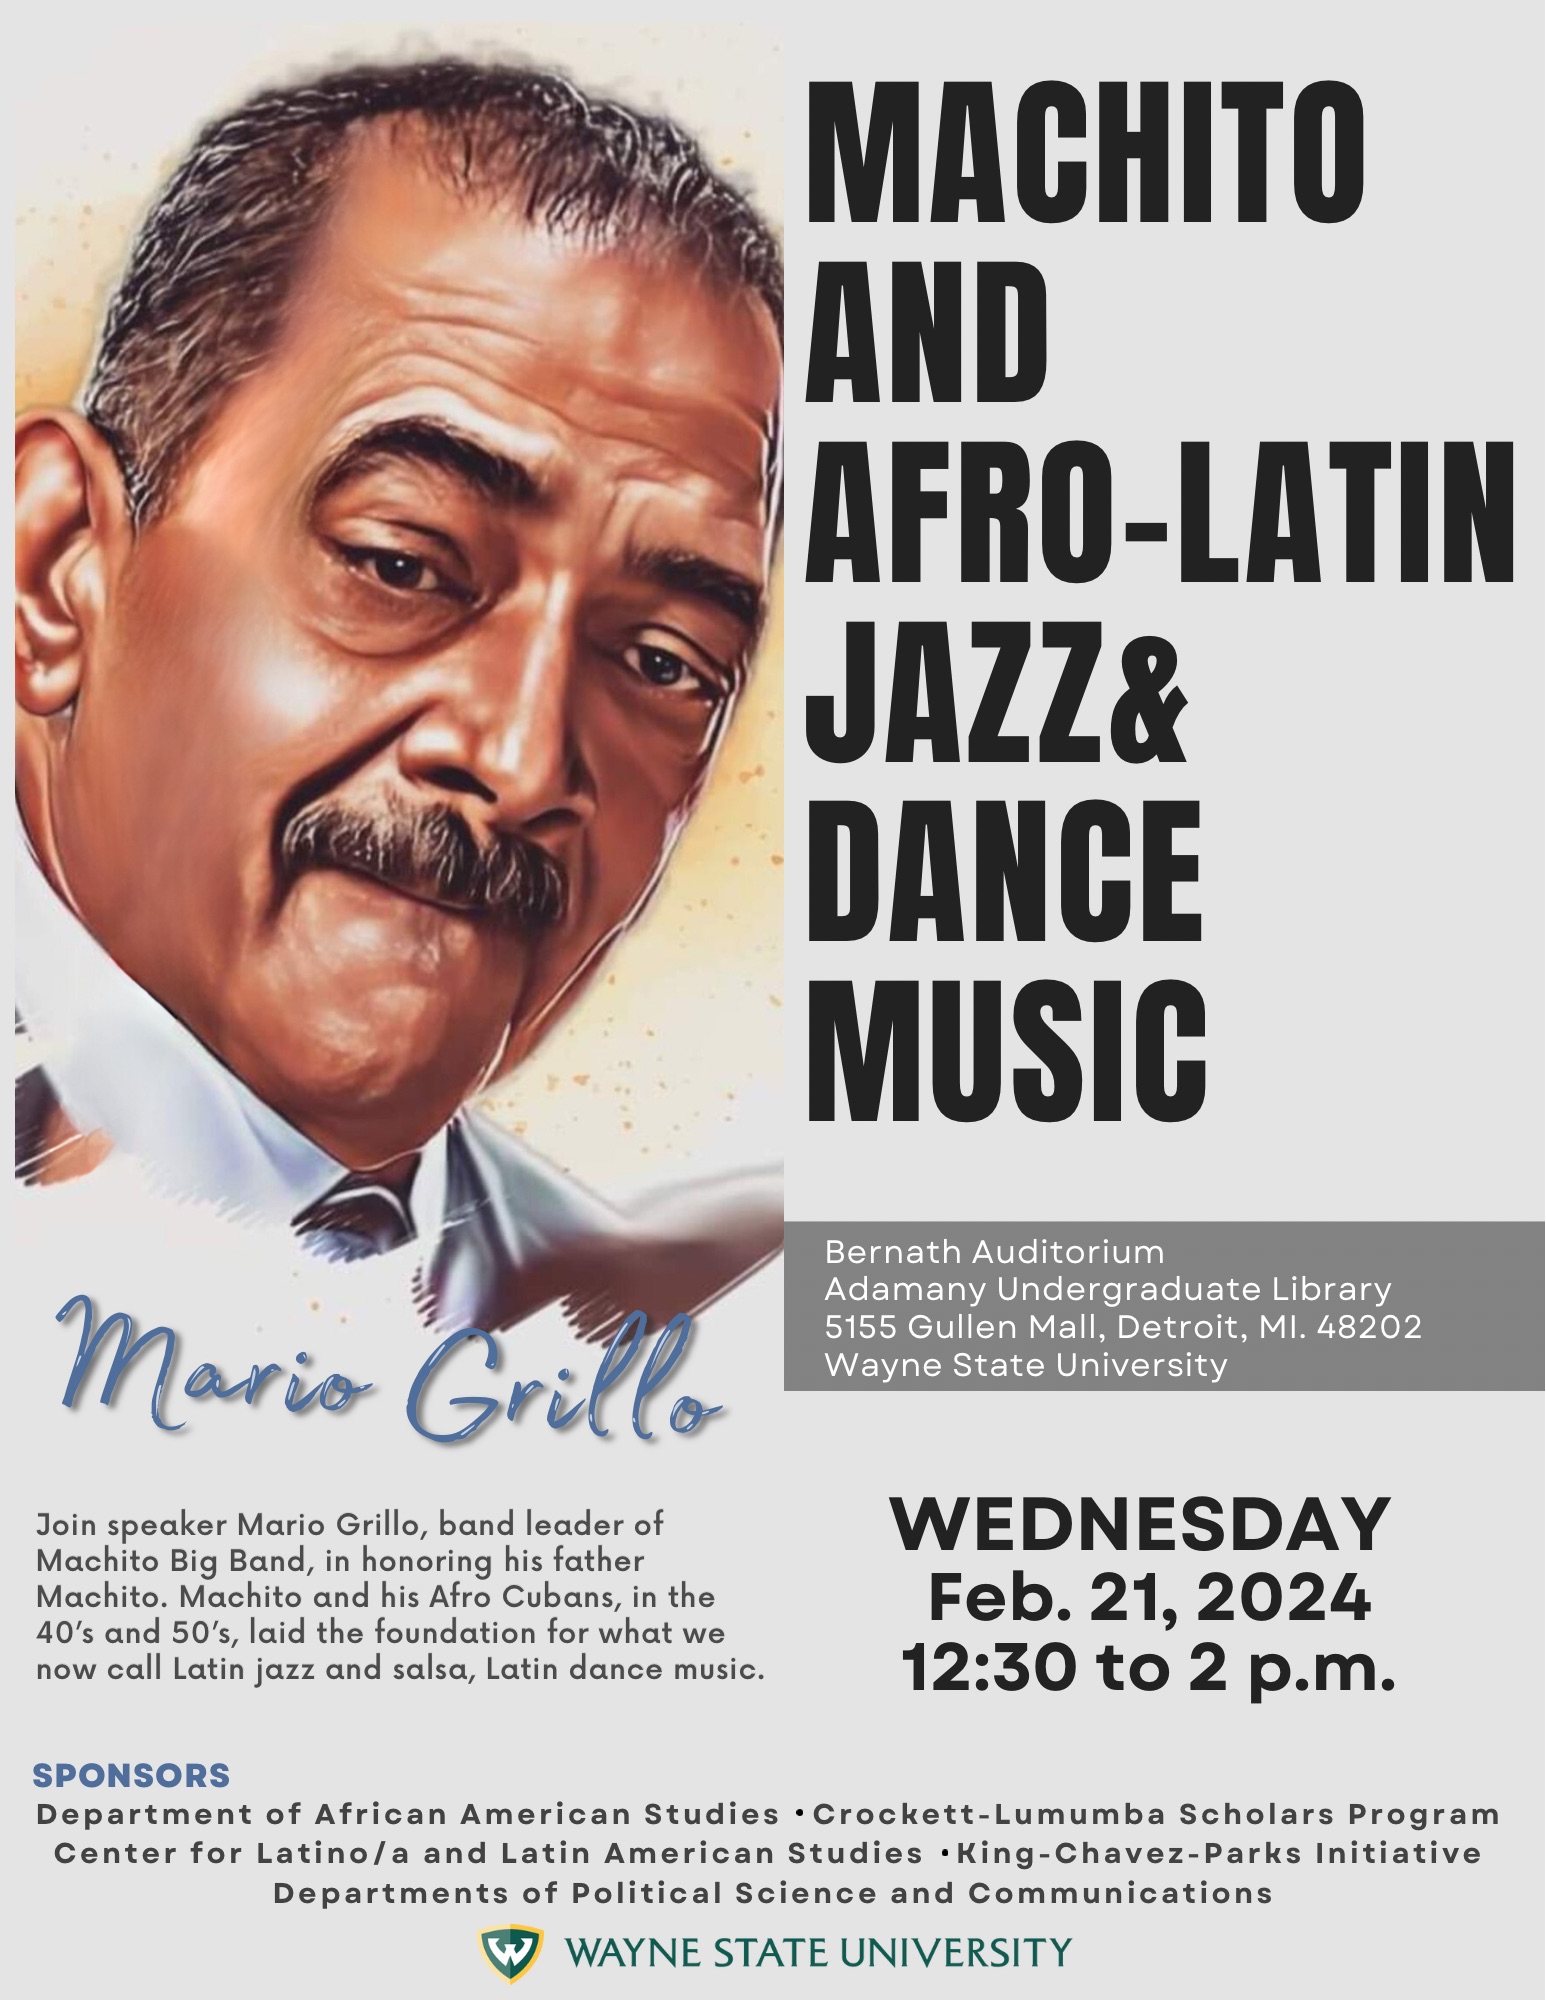 Mario Grillo on the Machito influence, Afro Latin jazz and dance music